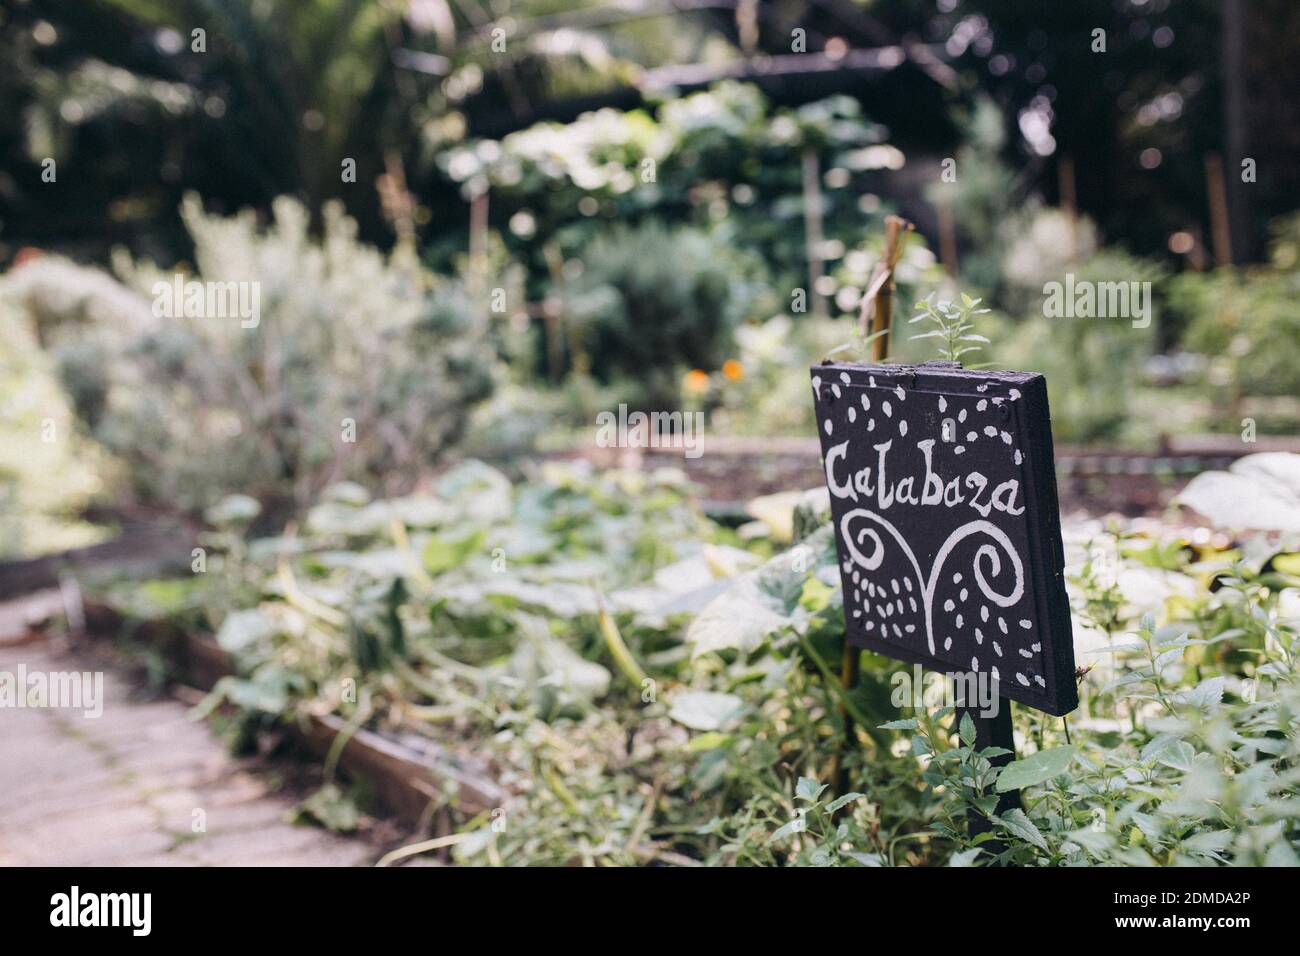 Chalkboard Sign For Pumpkin In A Vegetable Urban Garden In Roma District, Mexico City, Mexico Stock Photo